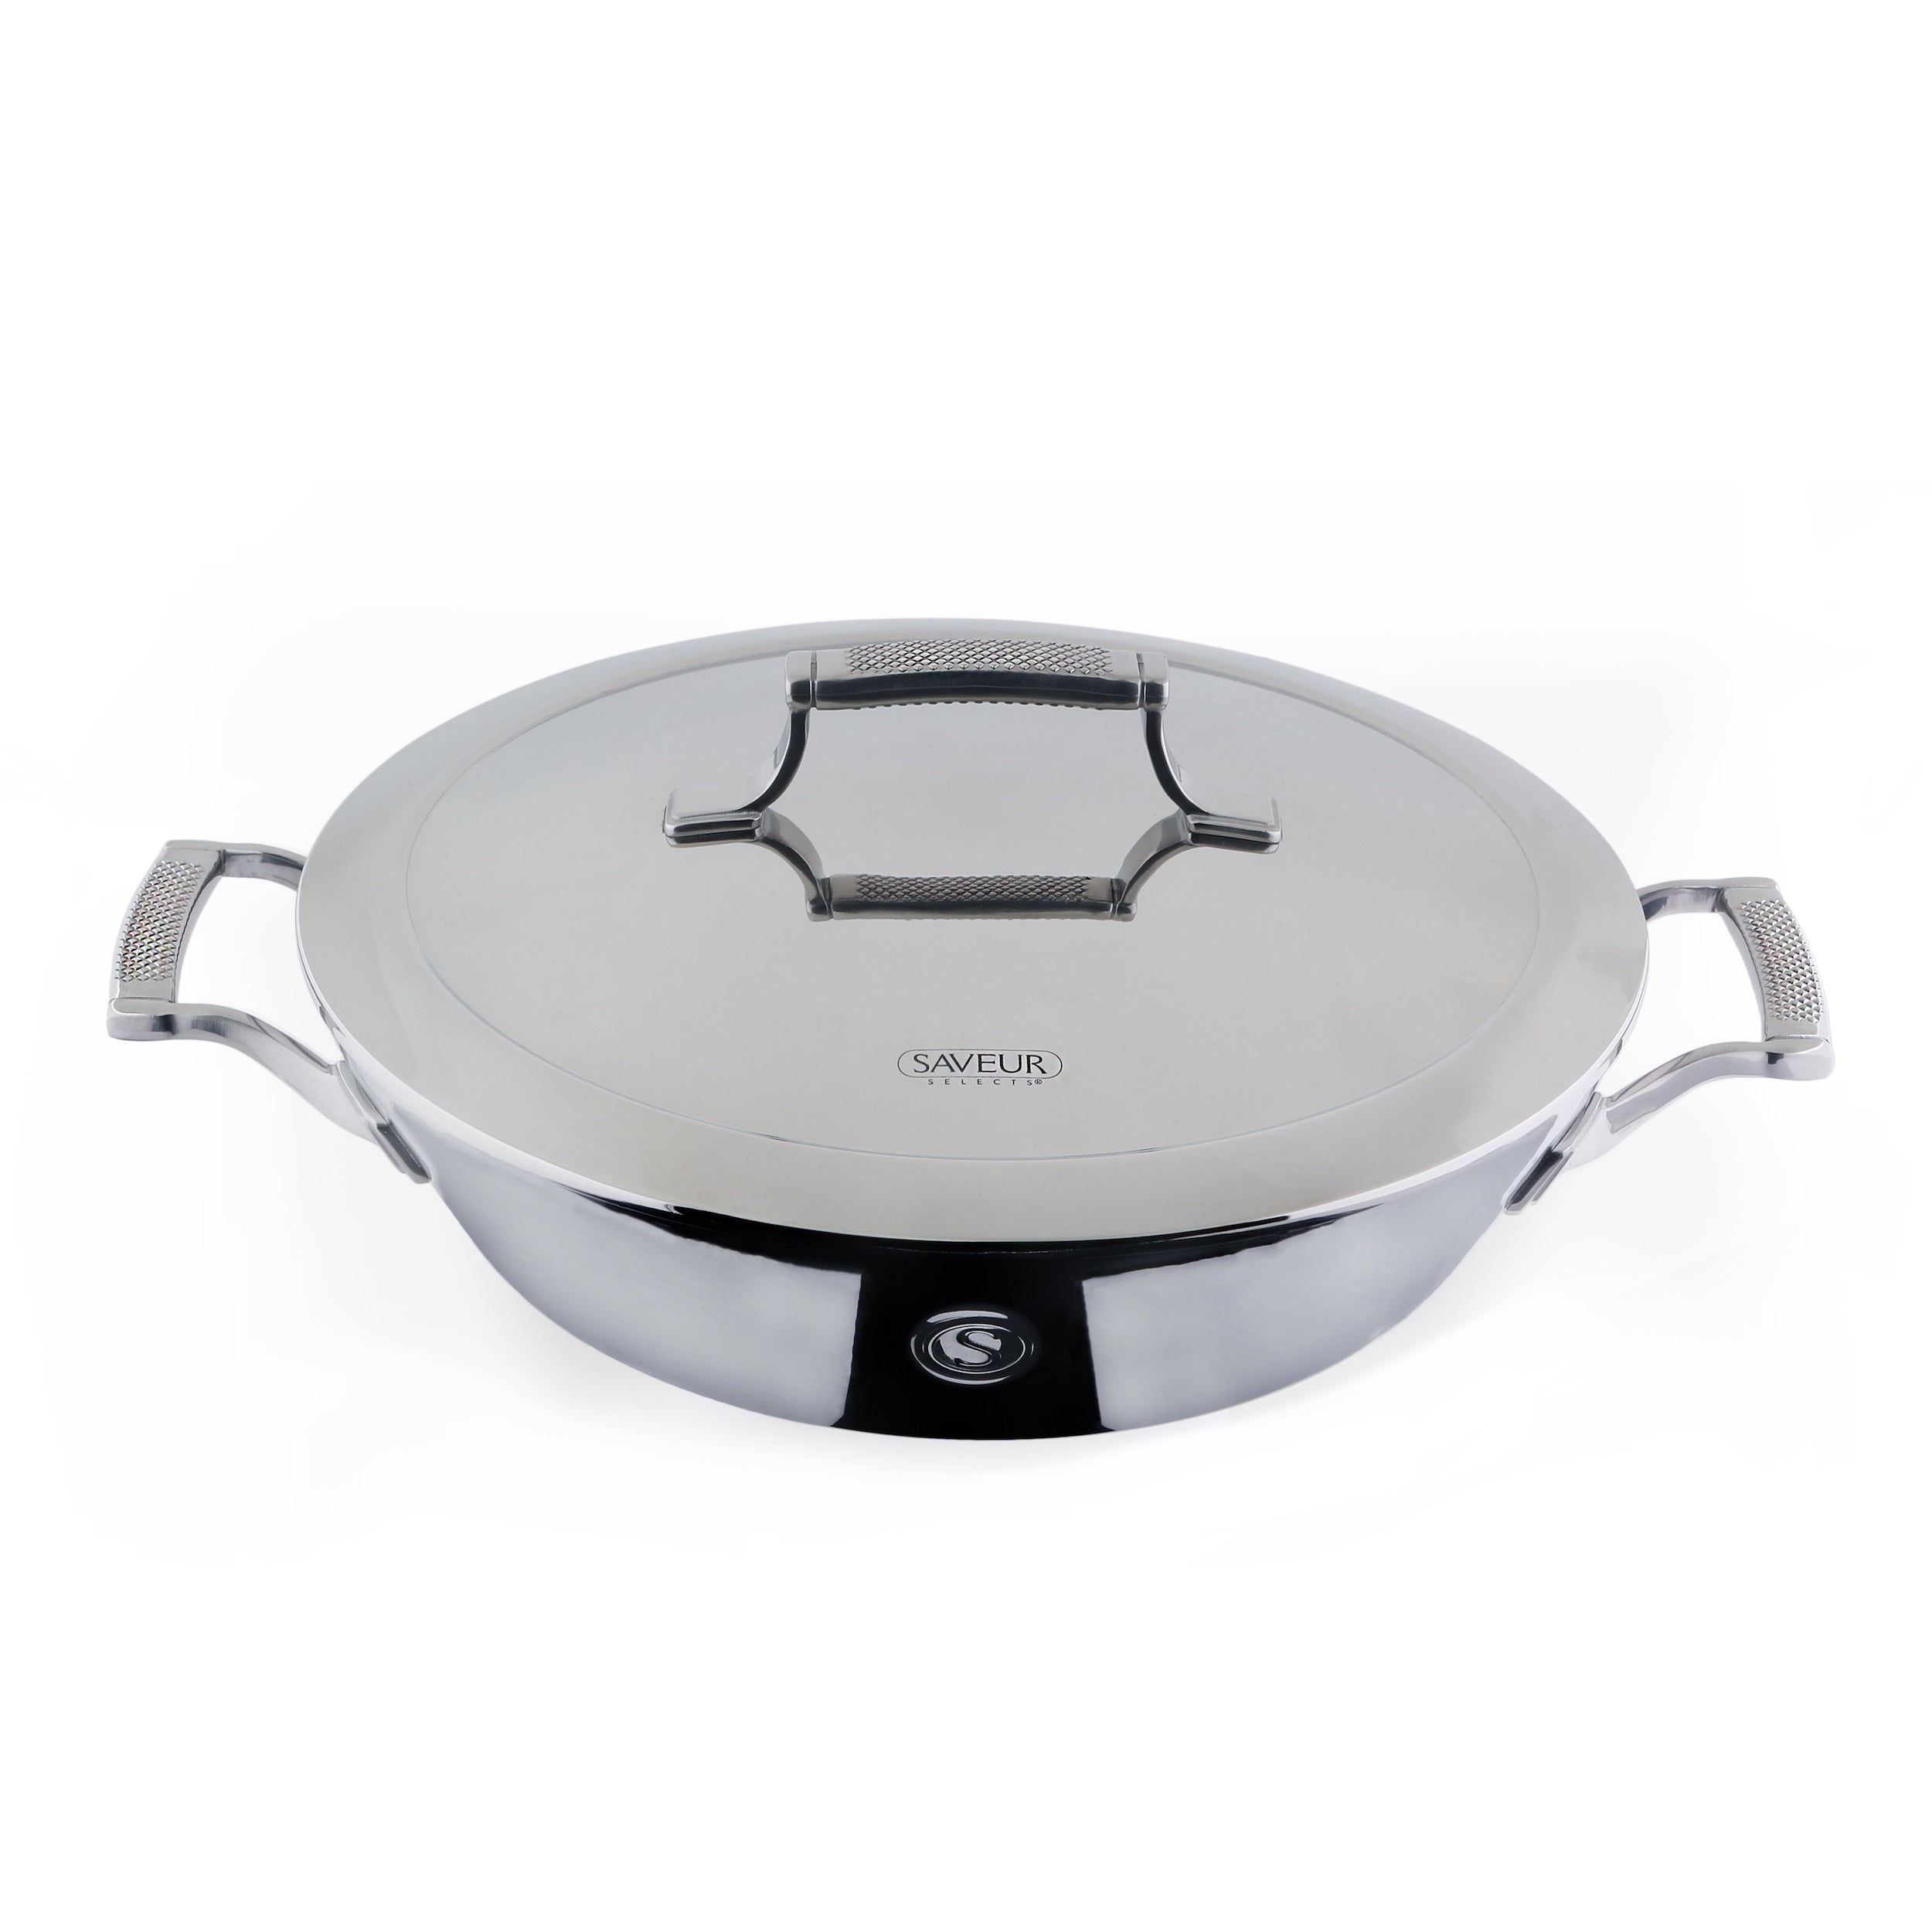 American Kitchen Cookware Tri-Ply Stainless Steel 12-inch Covered Sauté Pan